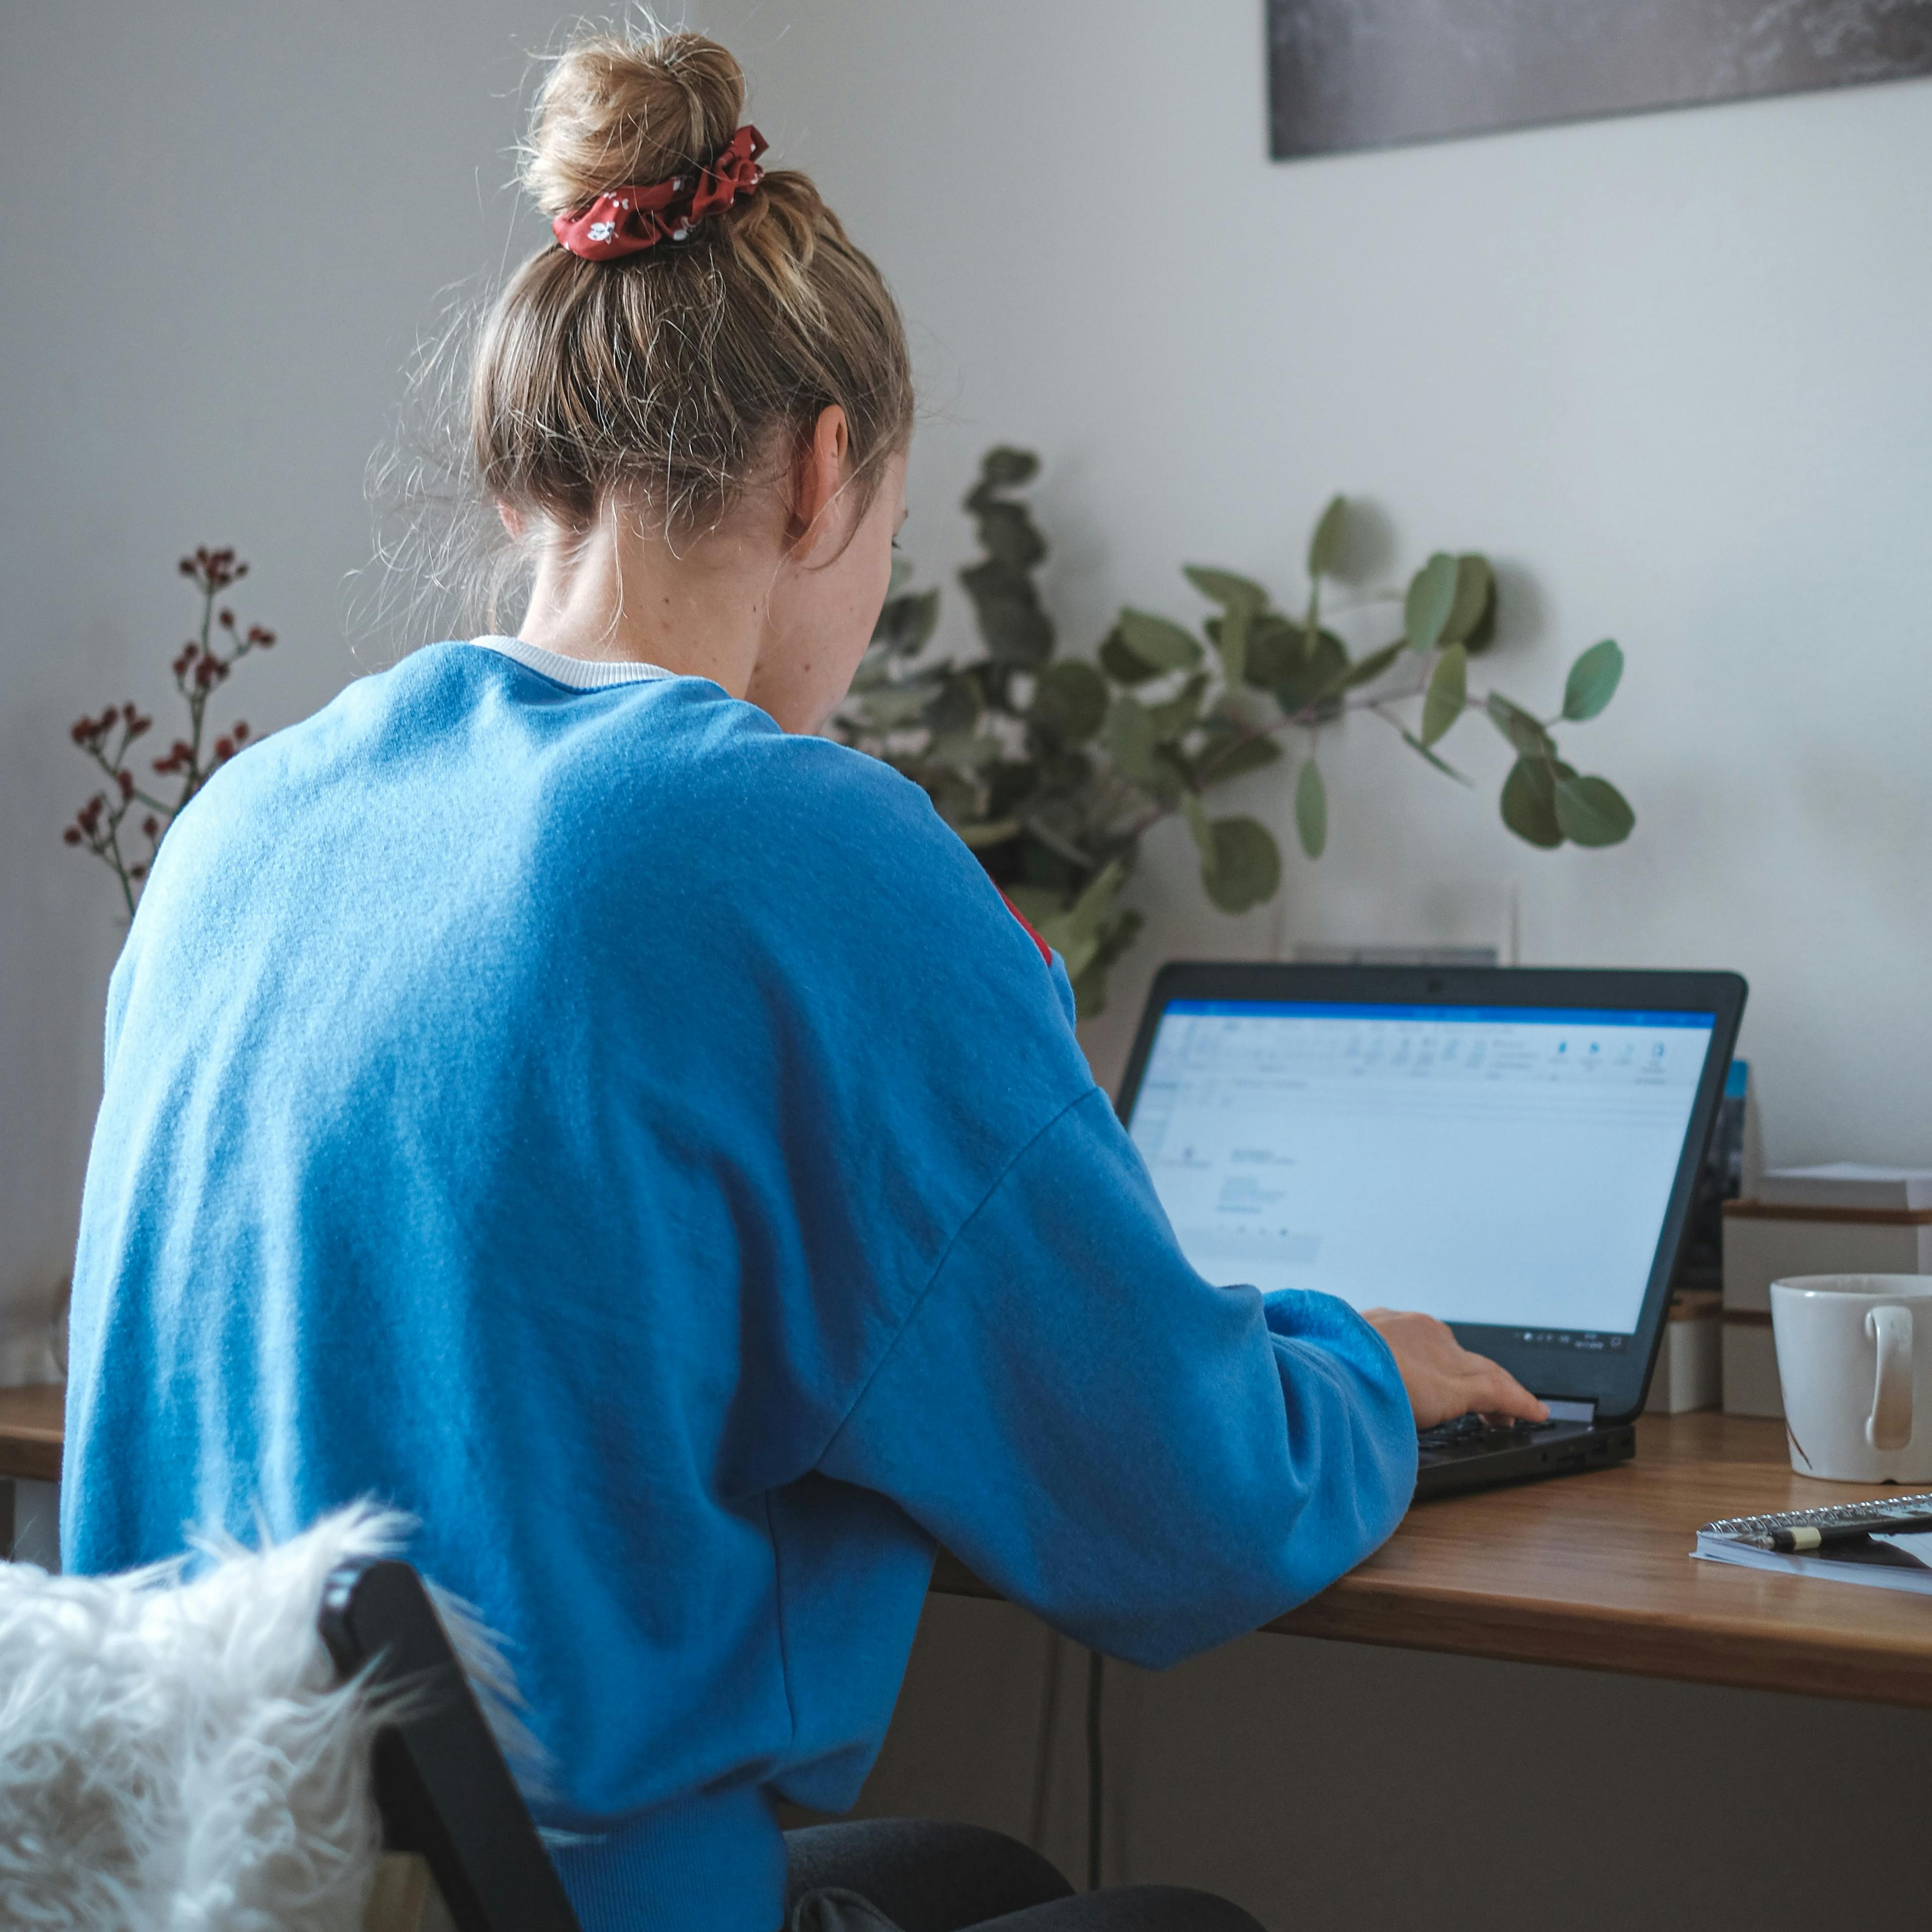 A student working at home remotely